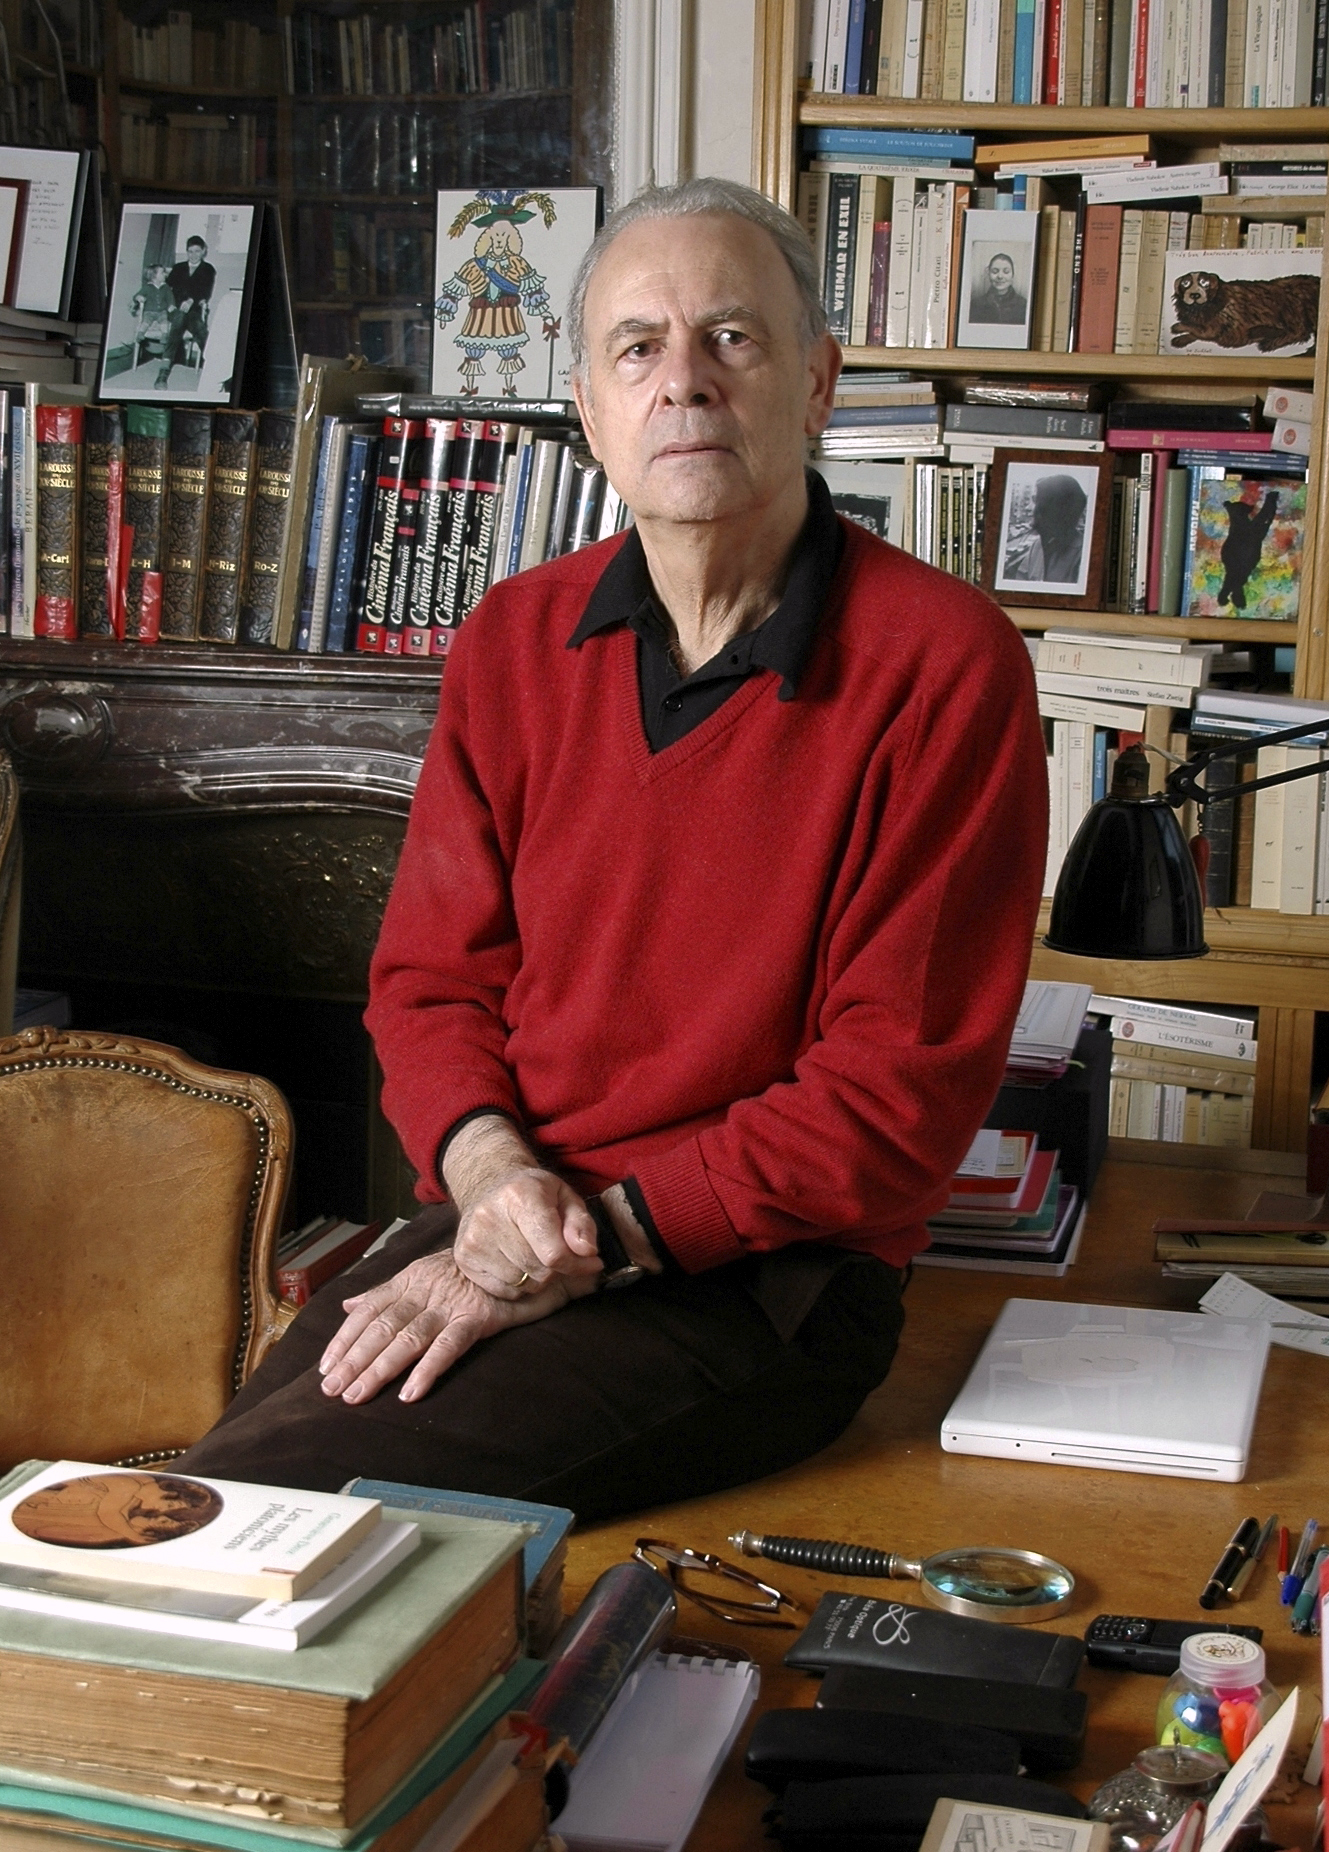 French novelist Patrick Modiano poses for a photograph. Patrick Modiano of France has won the 2014 Nobel Prize for Literature.